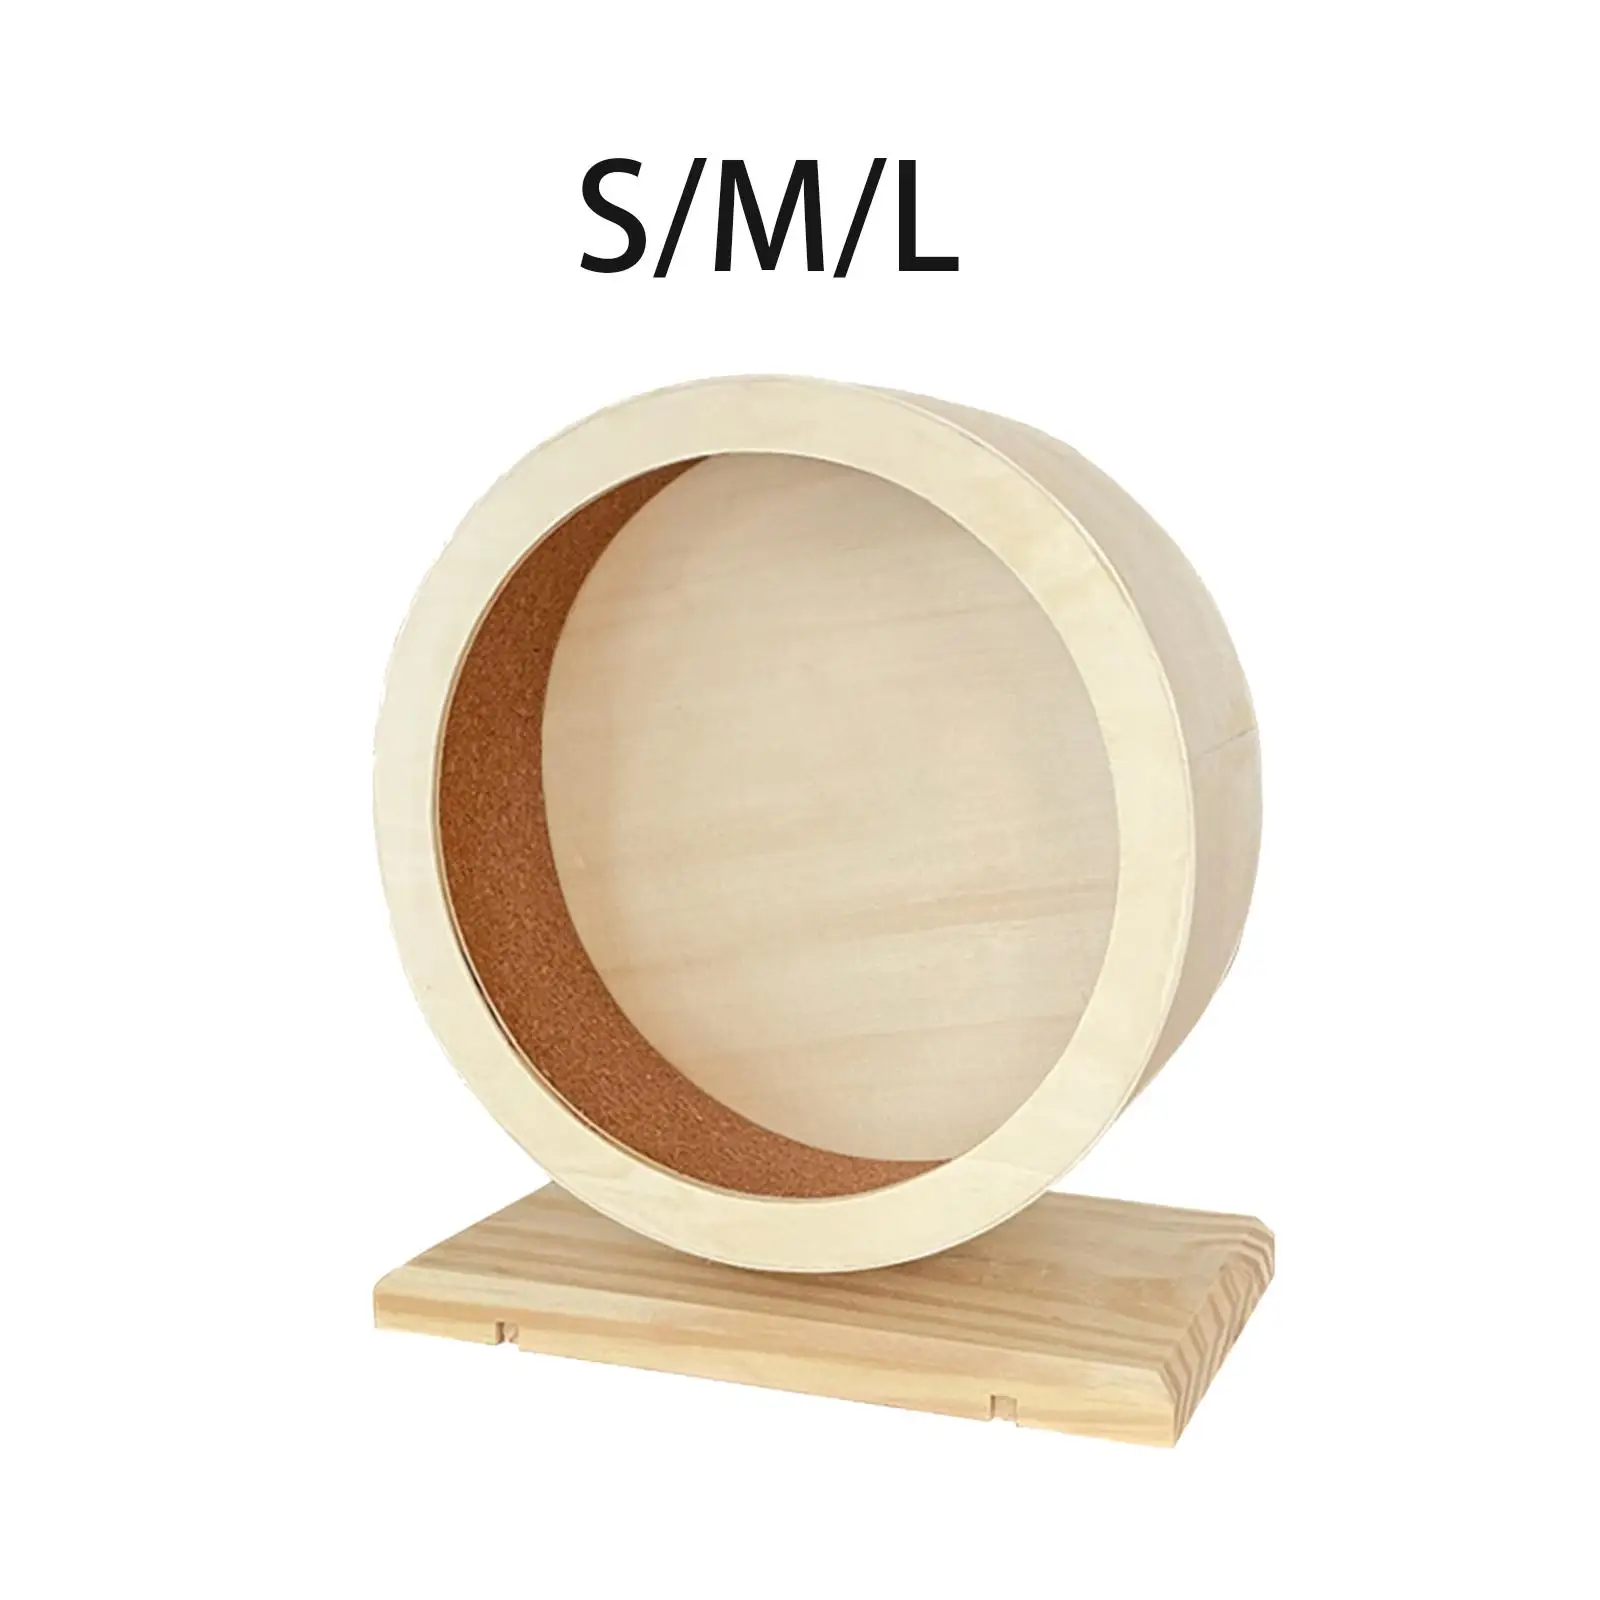 Wooden Hamster Exercise Wheel Small Chinchilla Rotary Runner Accessories